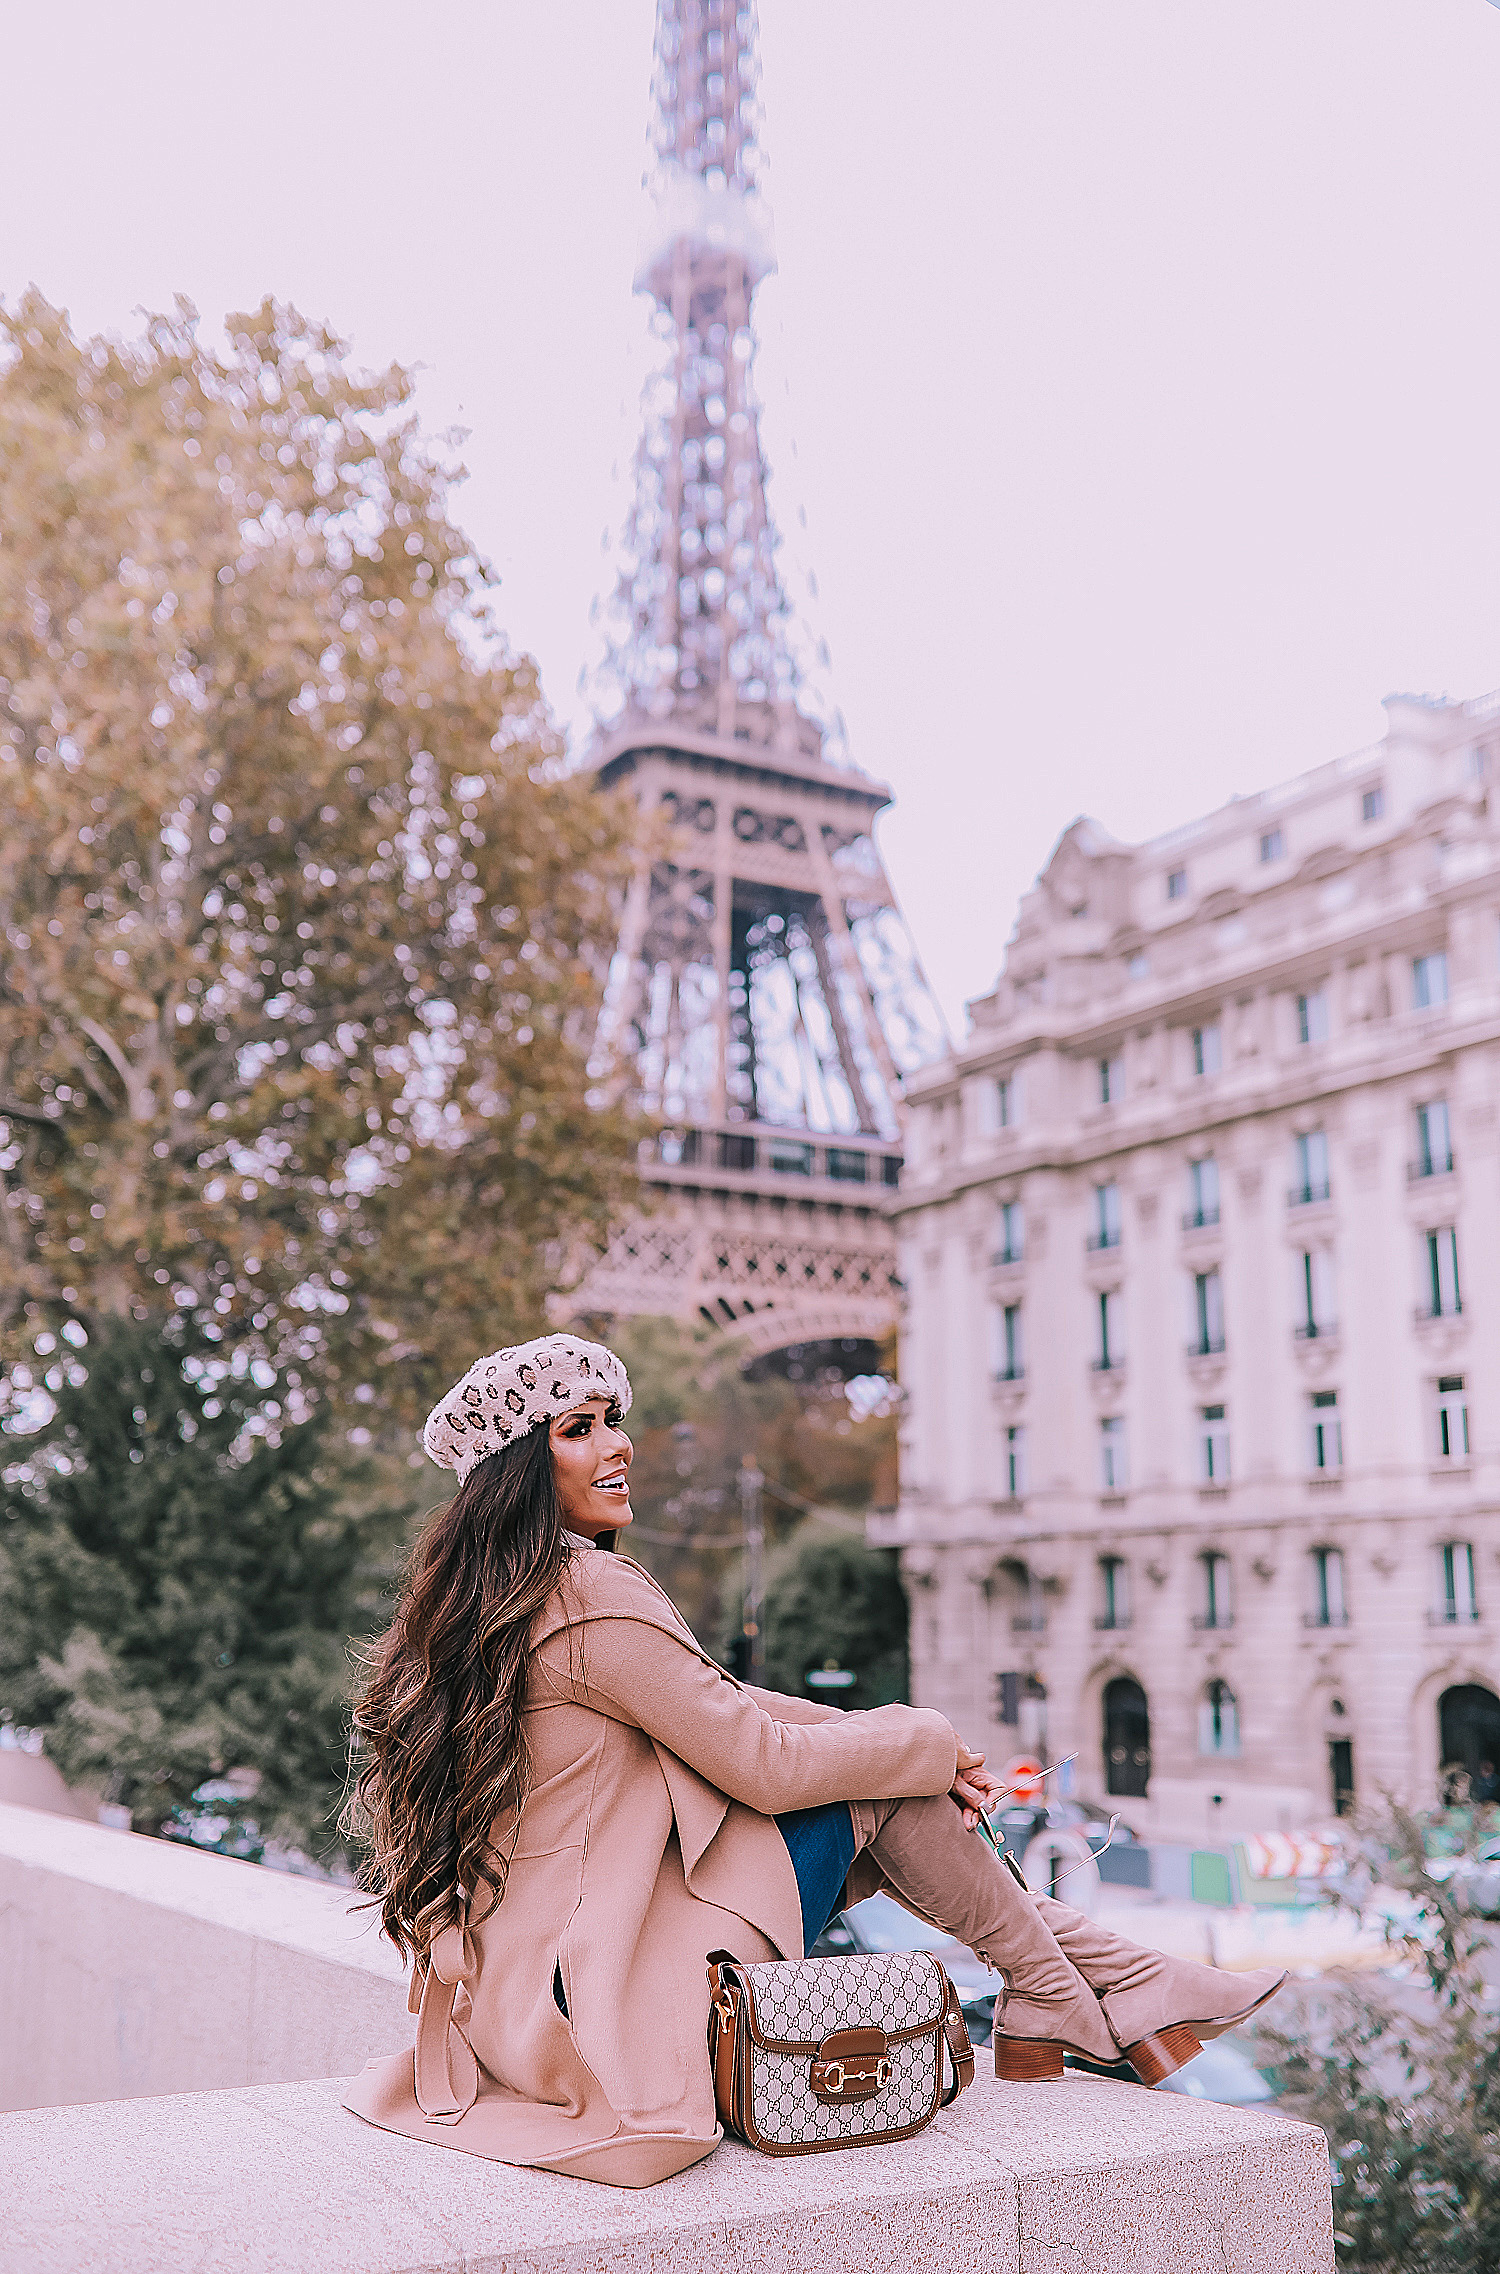 Fall outfit idea paris pinterest 2019| Over the knee boot outfit featured by top US fashion blog, The Sweetest Thing: image of a woman wearing  Gucci Horsebit 1955 Gucci Bag, leopard beret, taupe over the knee boots steve madden, emily gemma, Fall Fashion outfit ideas tan coat over the knee boots-2